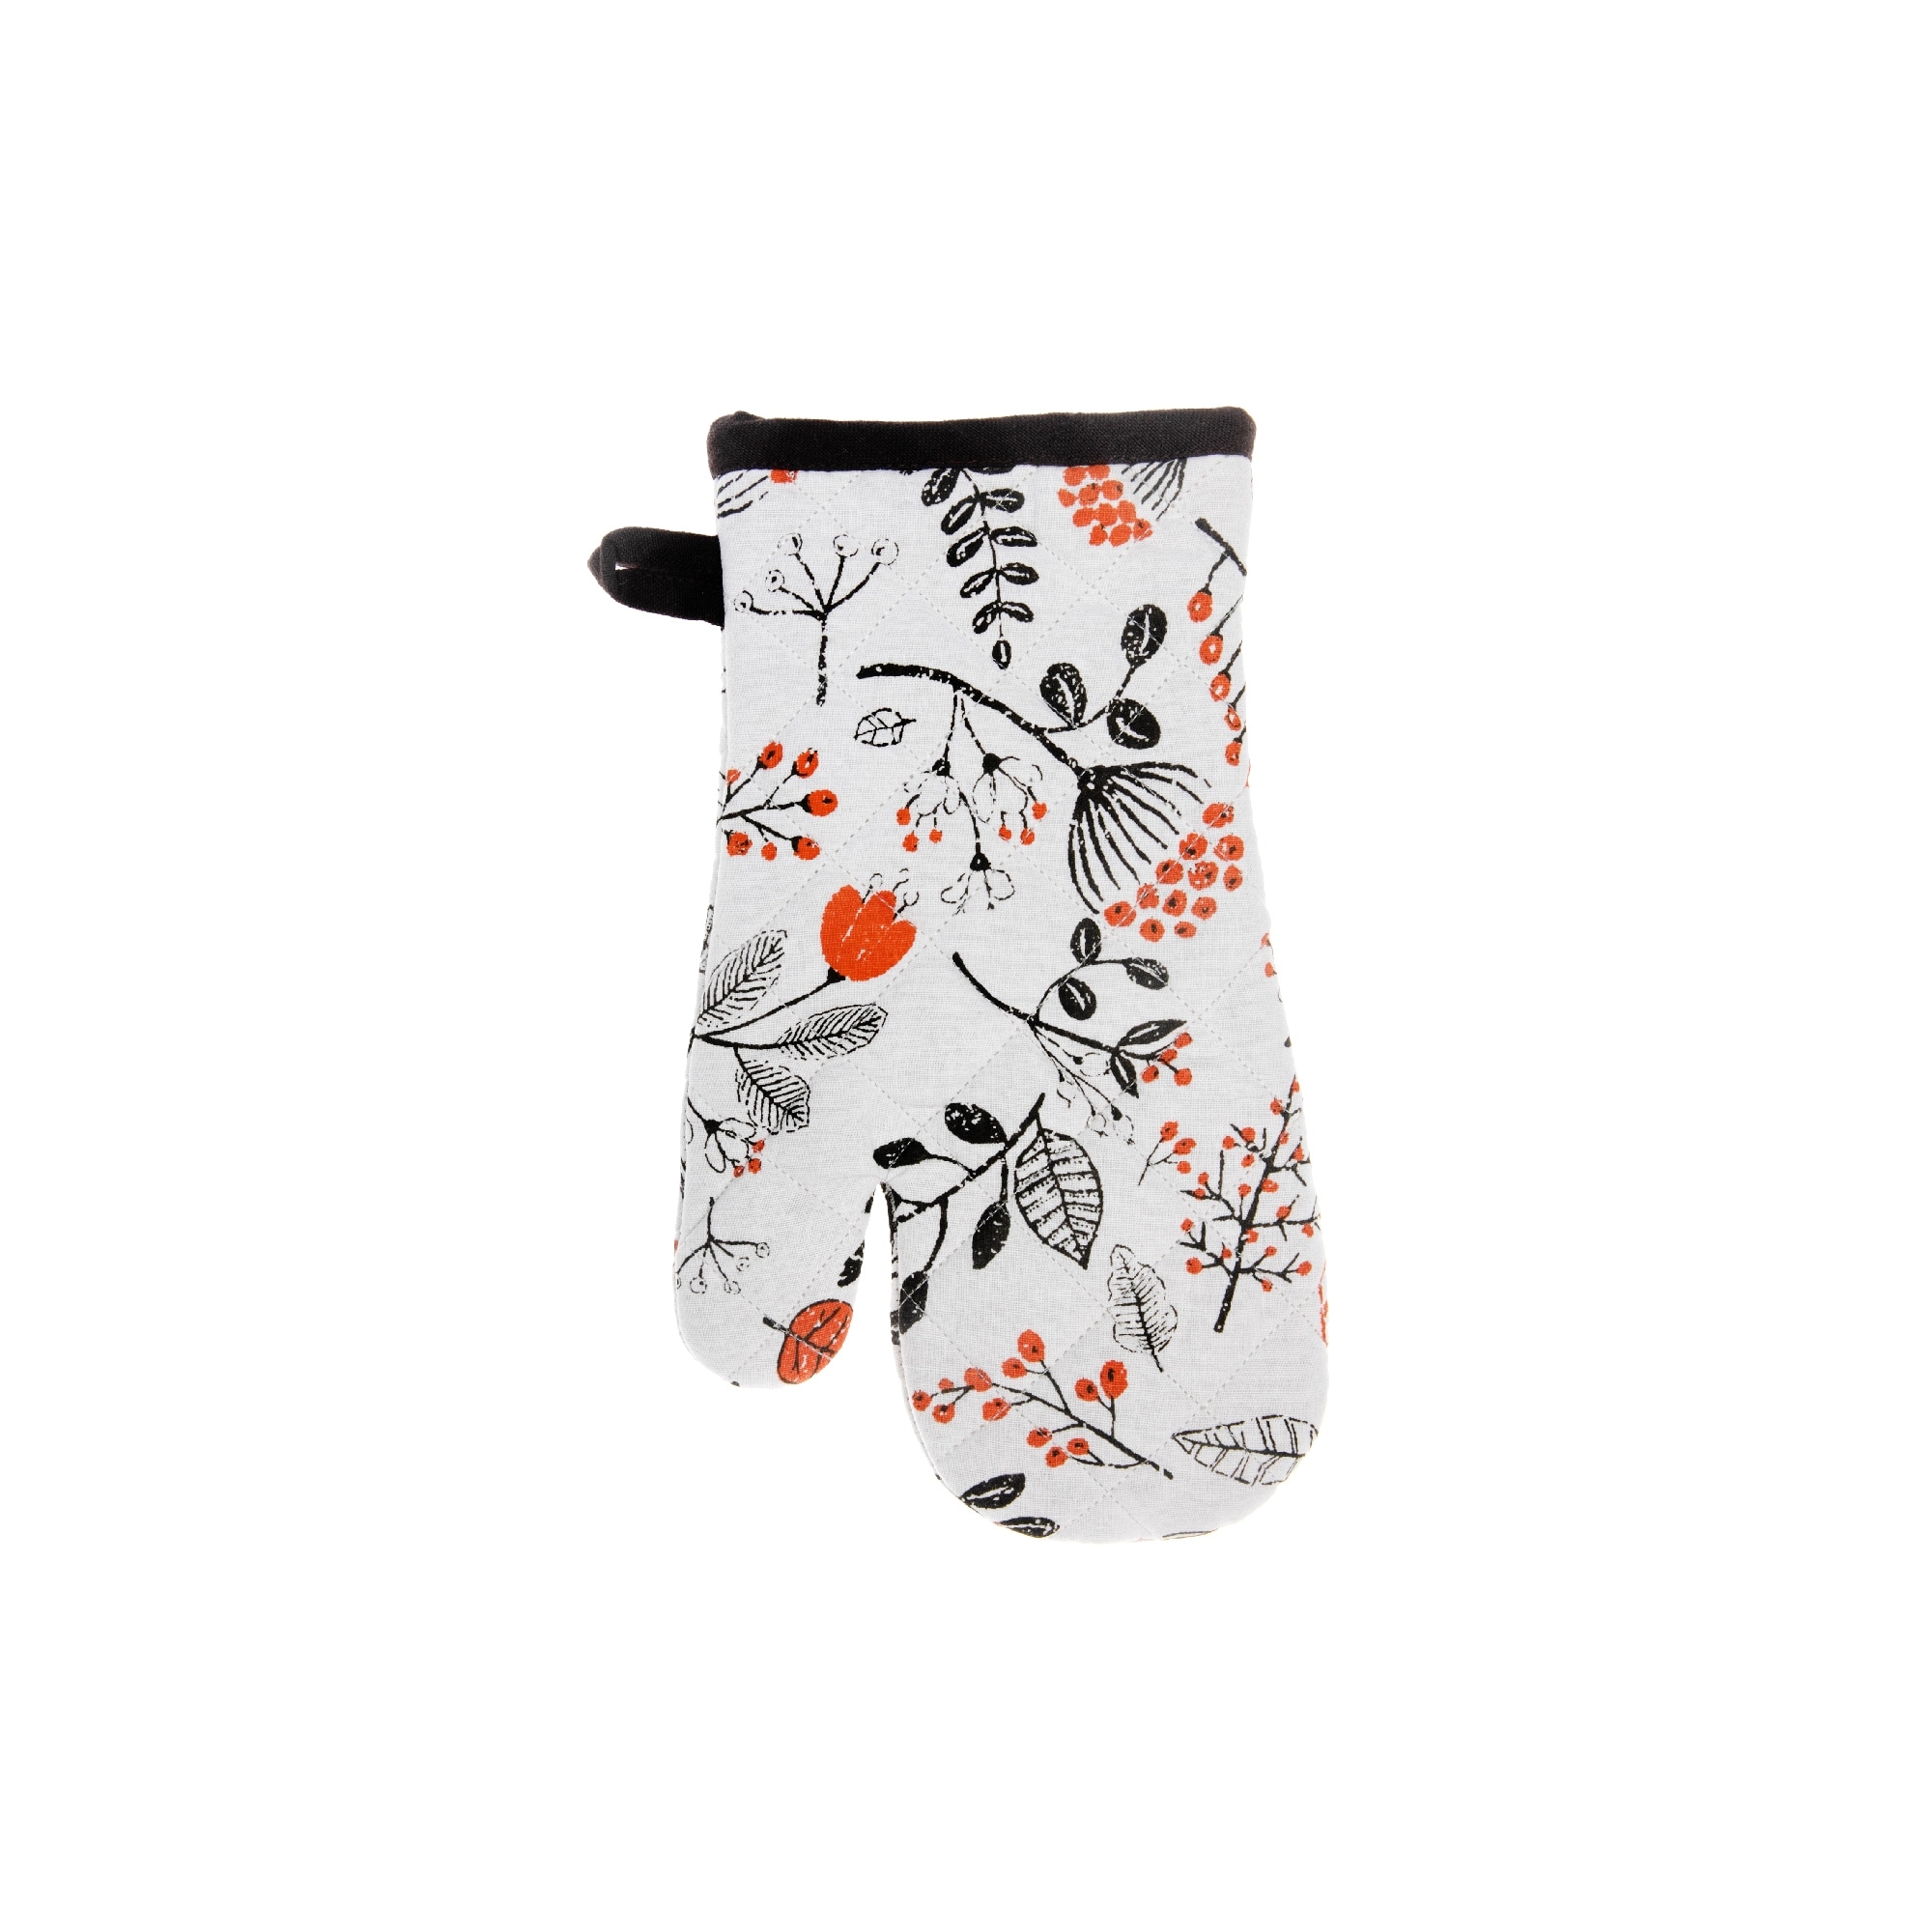 https://ak1.ostkcdn.com/images/products/is/images/direct/75540f004d0ce5c7256c5267ff3609d041b552c4/Cotton-Oven-Mitt-%28Persimmon%29---Set-of-4.jpg